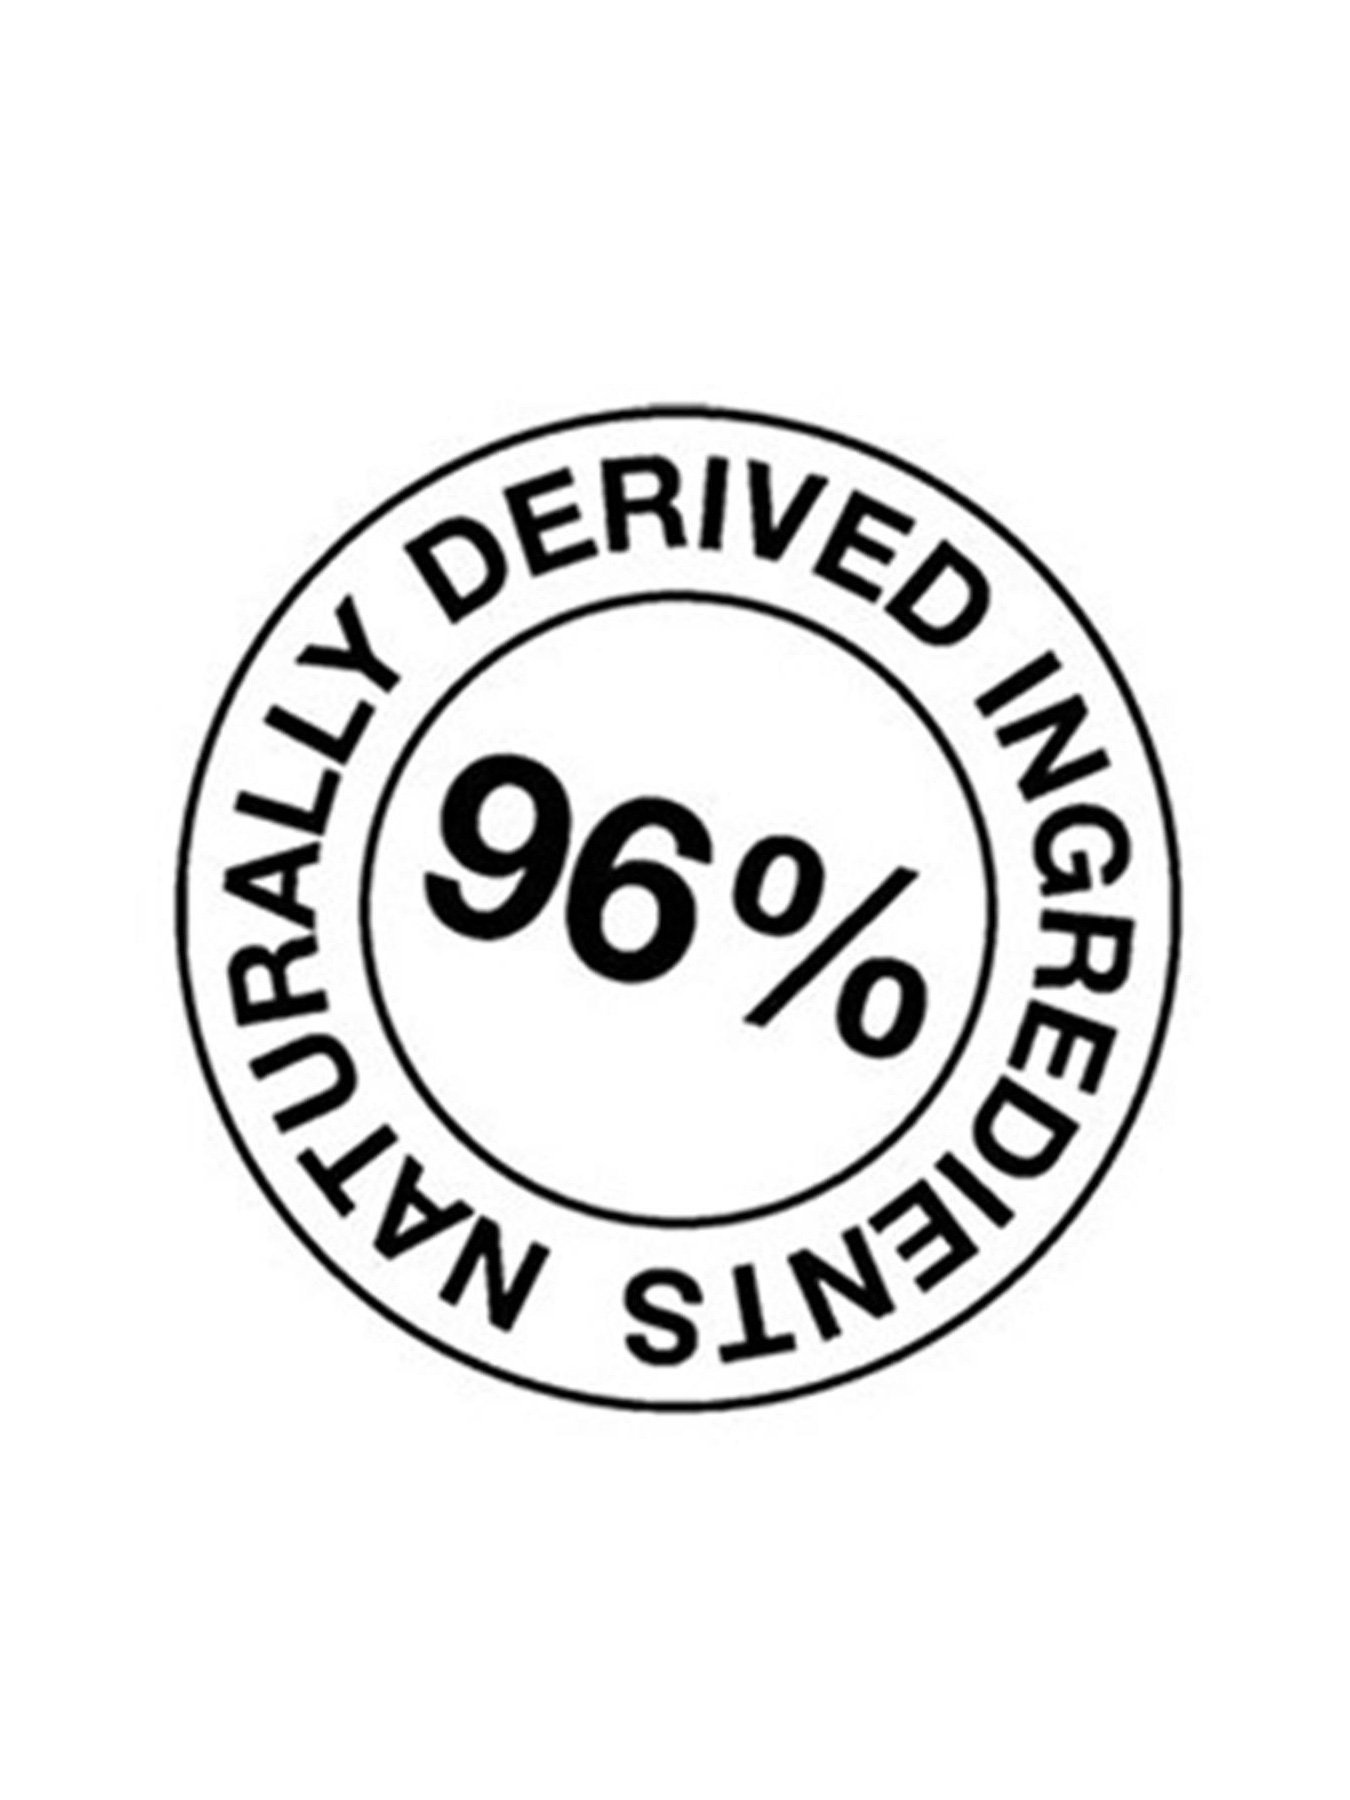 96% Naturally Derived Ingredients badge.